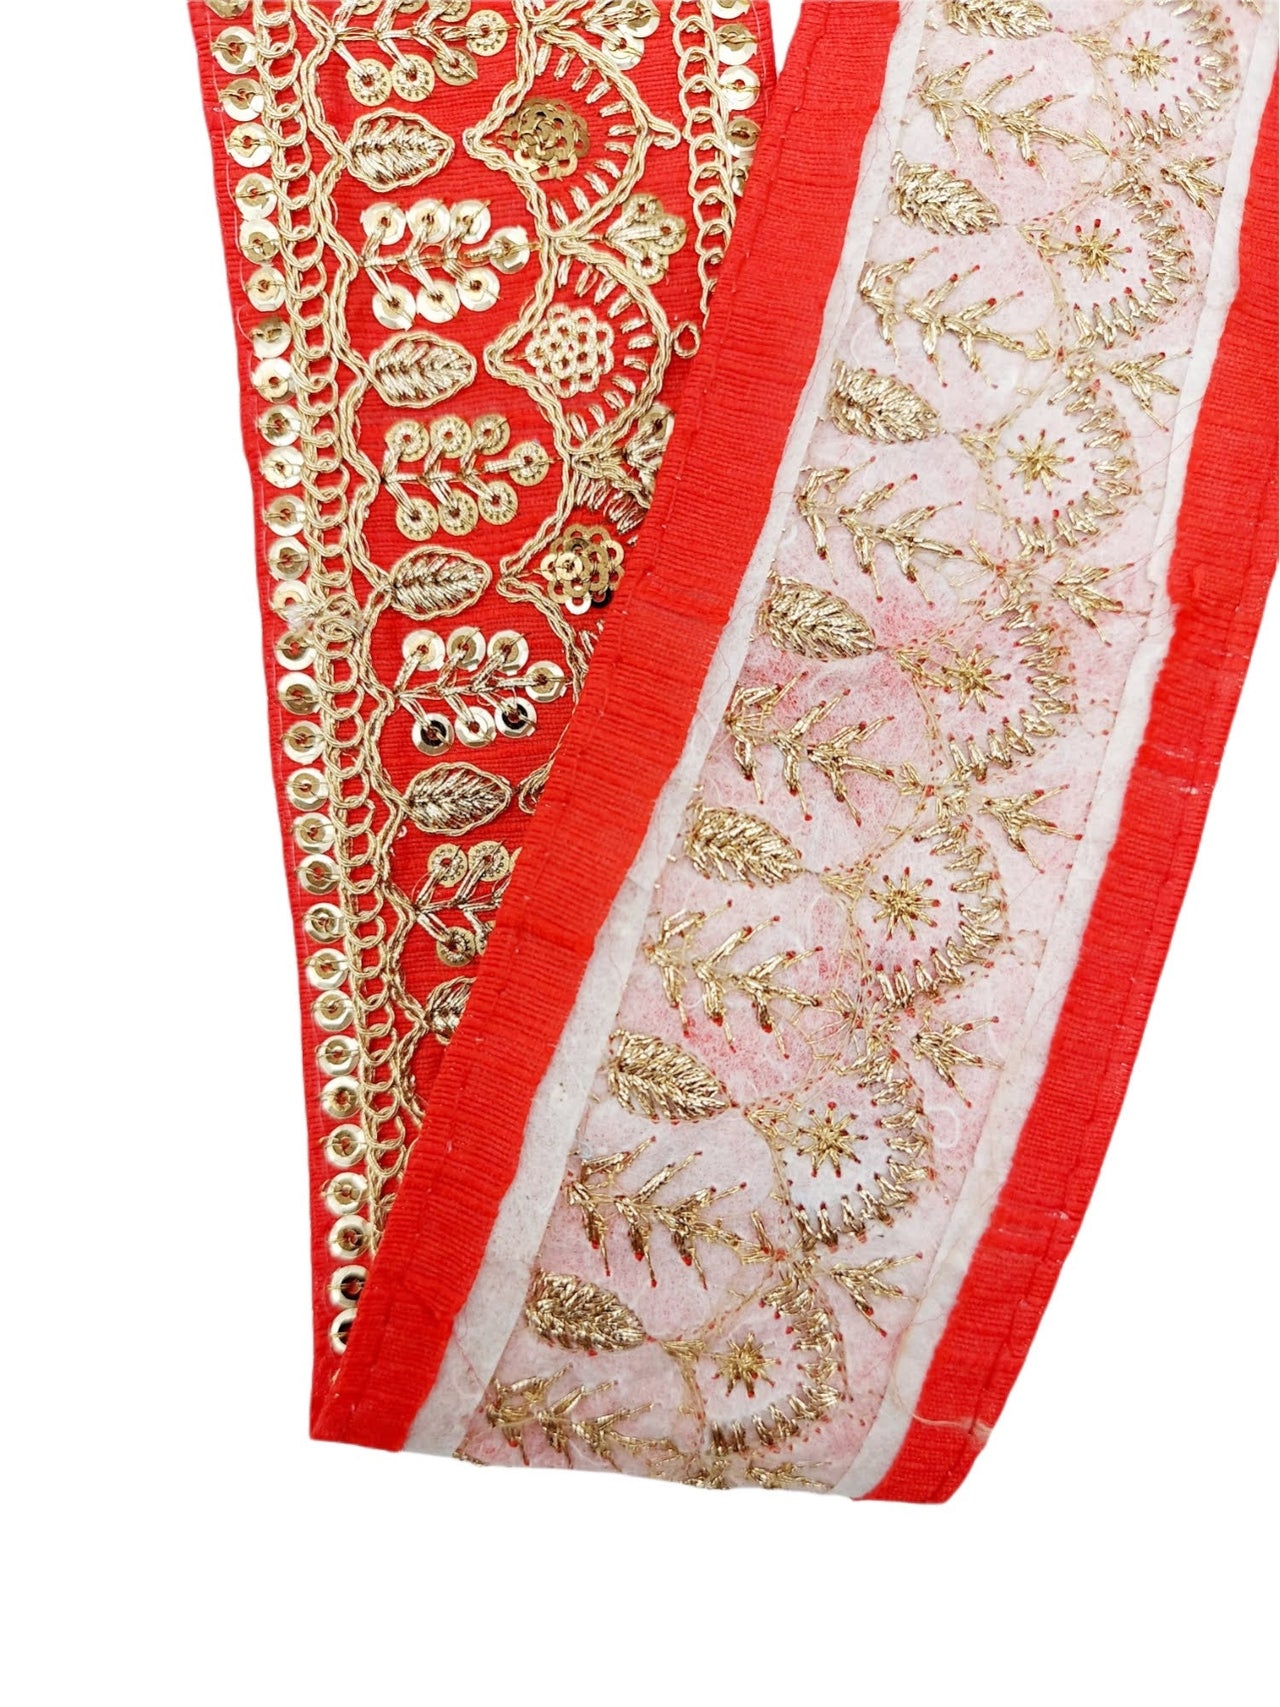 2 Yards, Red Gold Embroidered Lace Trim Sequins Trim 9 Yard Decorative Sari Border Costume Ribbon Crafting Sewing Tape